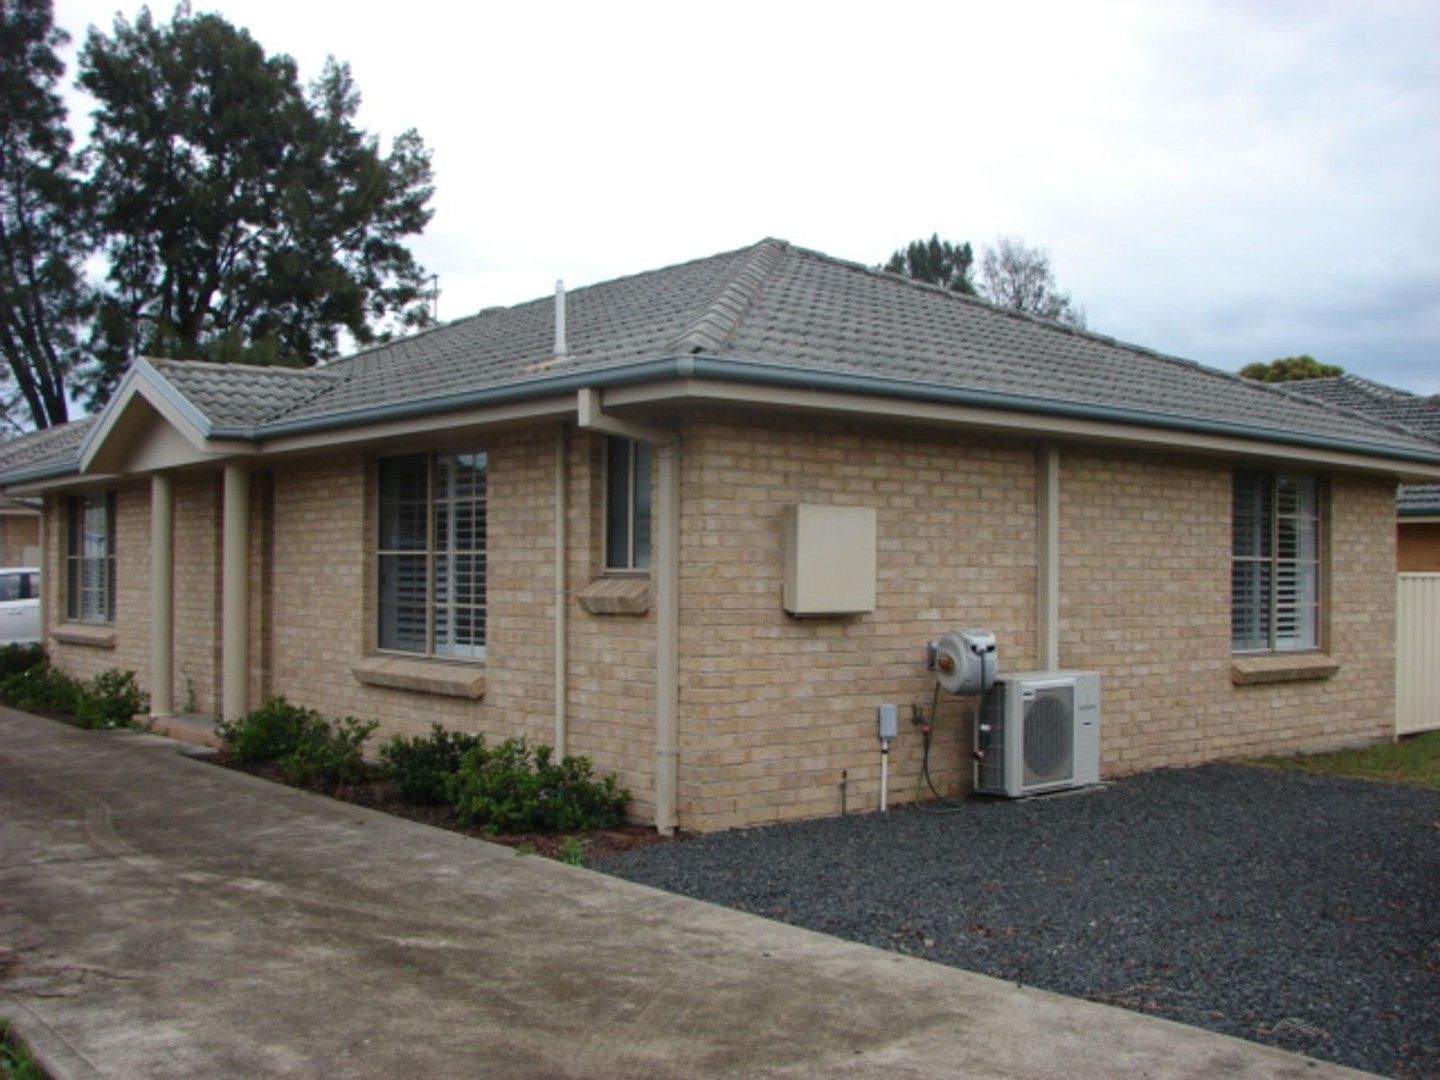 2 bedrooms Semi-Detached in 2/2 St Andrew Place MUSWELLBROOK NSW, 2333